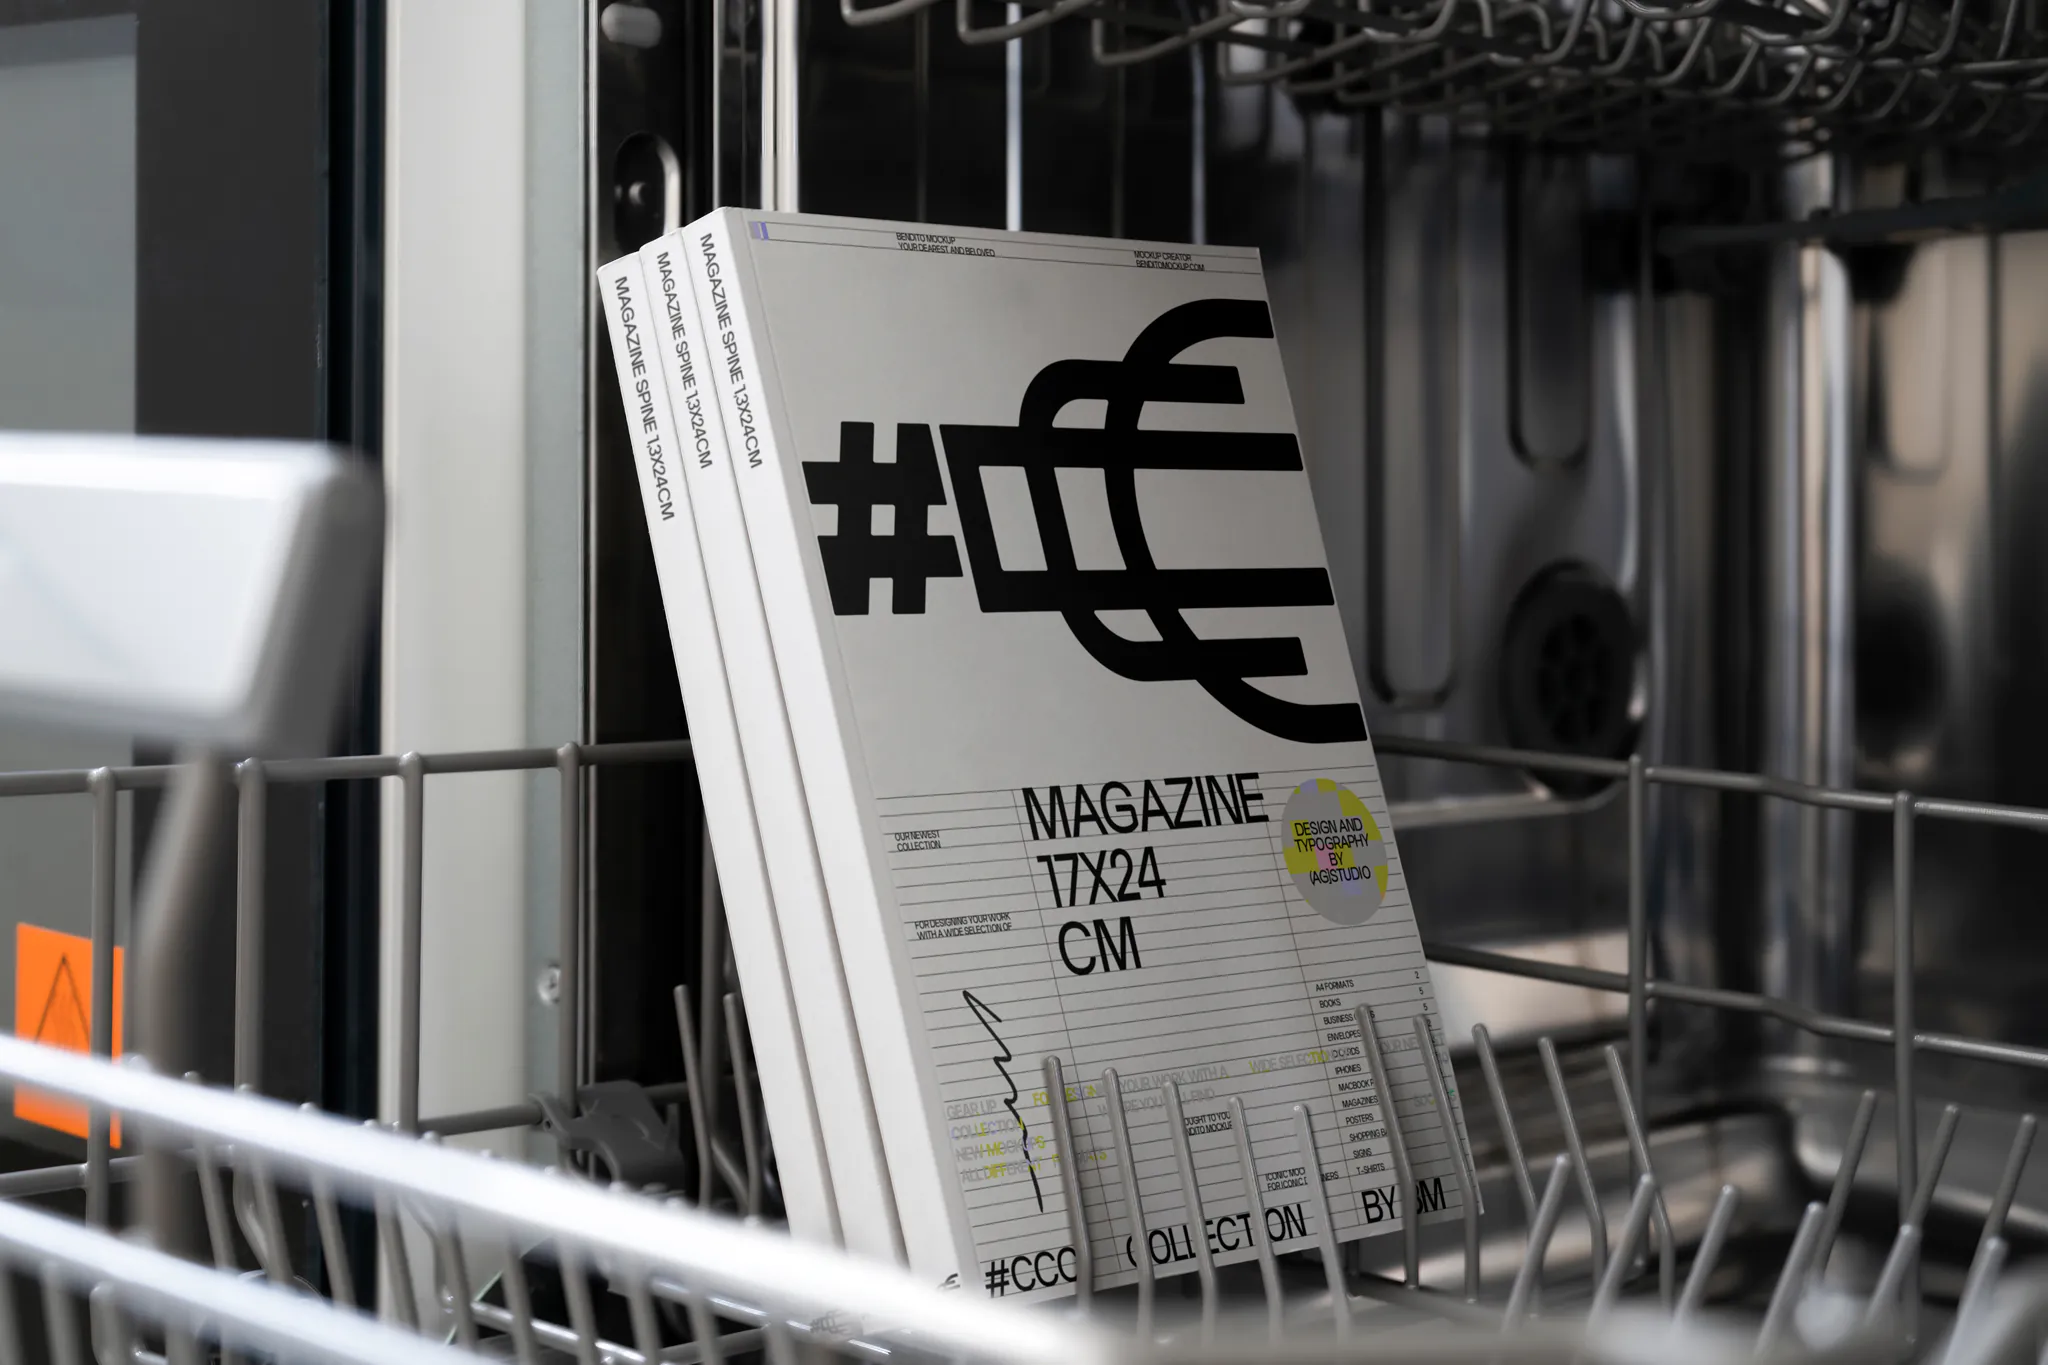 Magazine mockup. Set of magazines that are inside the structure of a dishwasher. Editorial mockup.